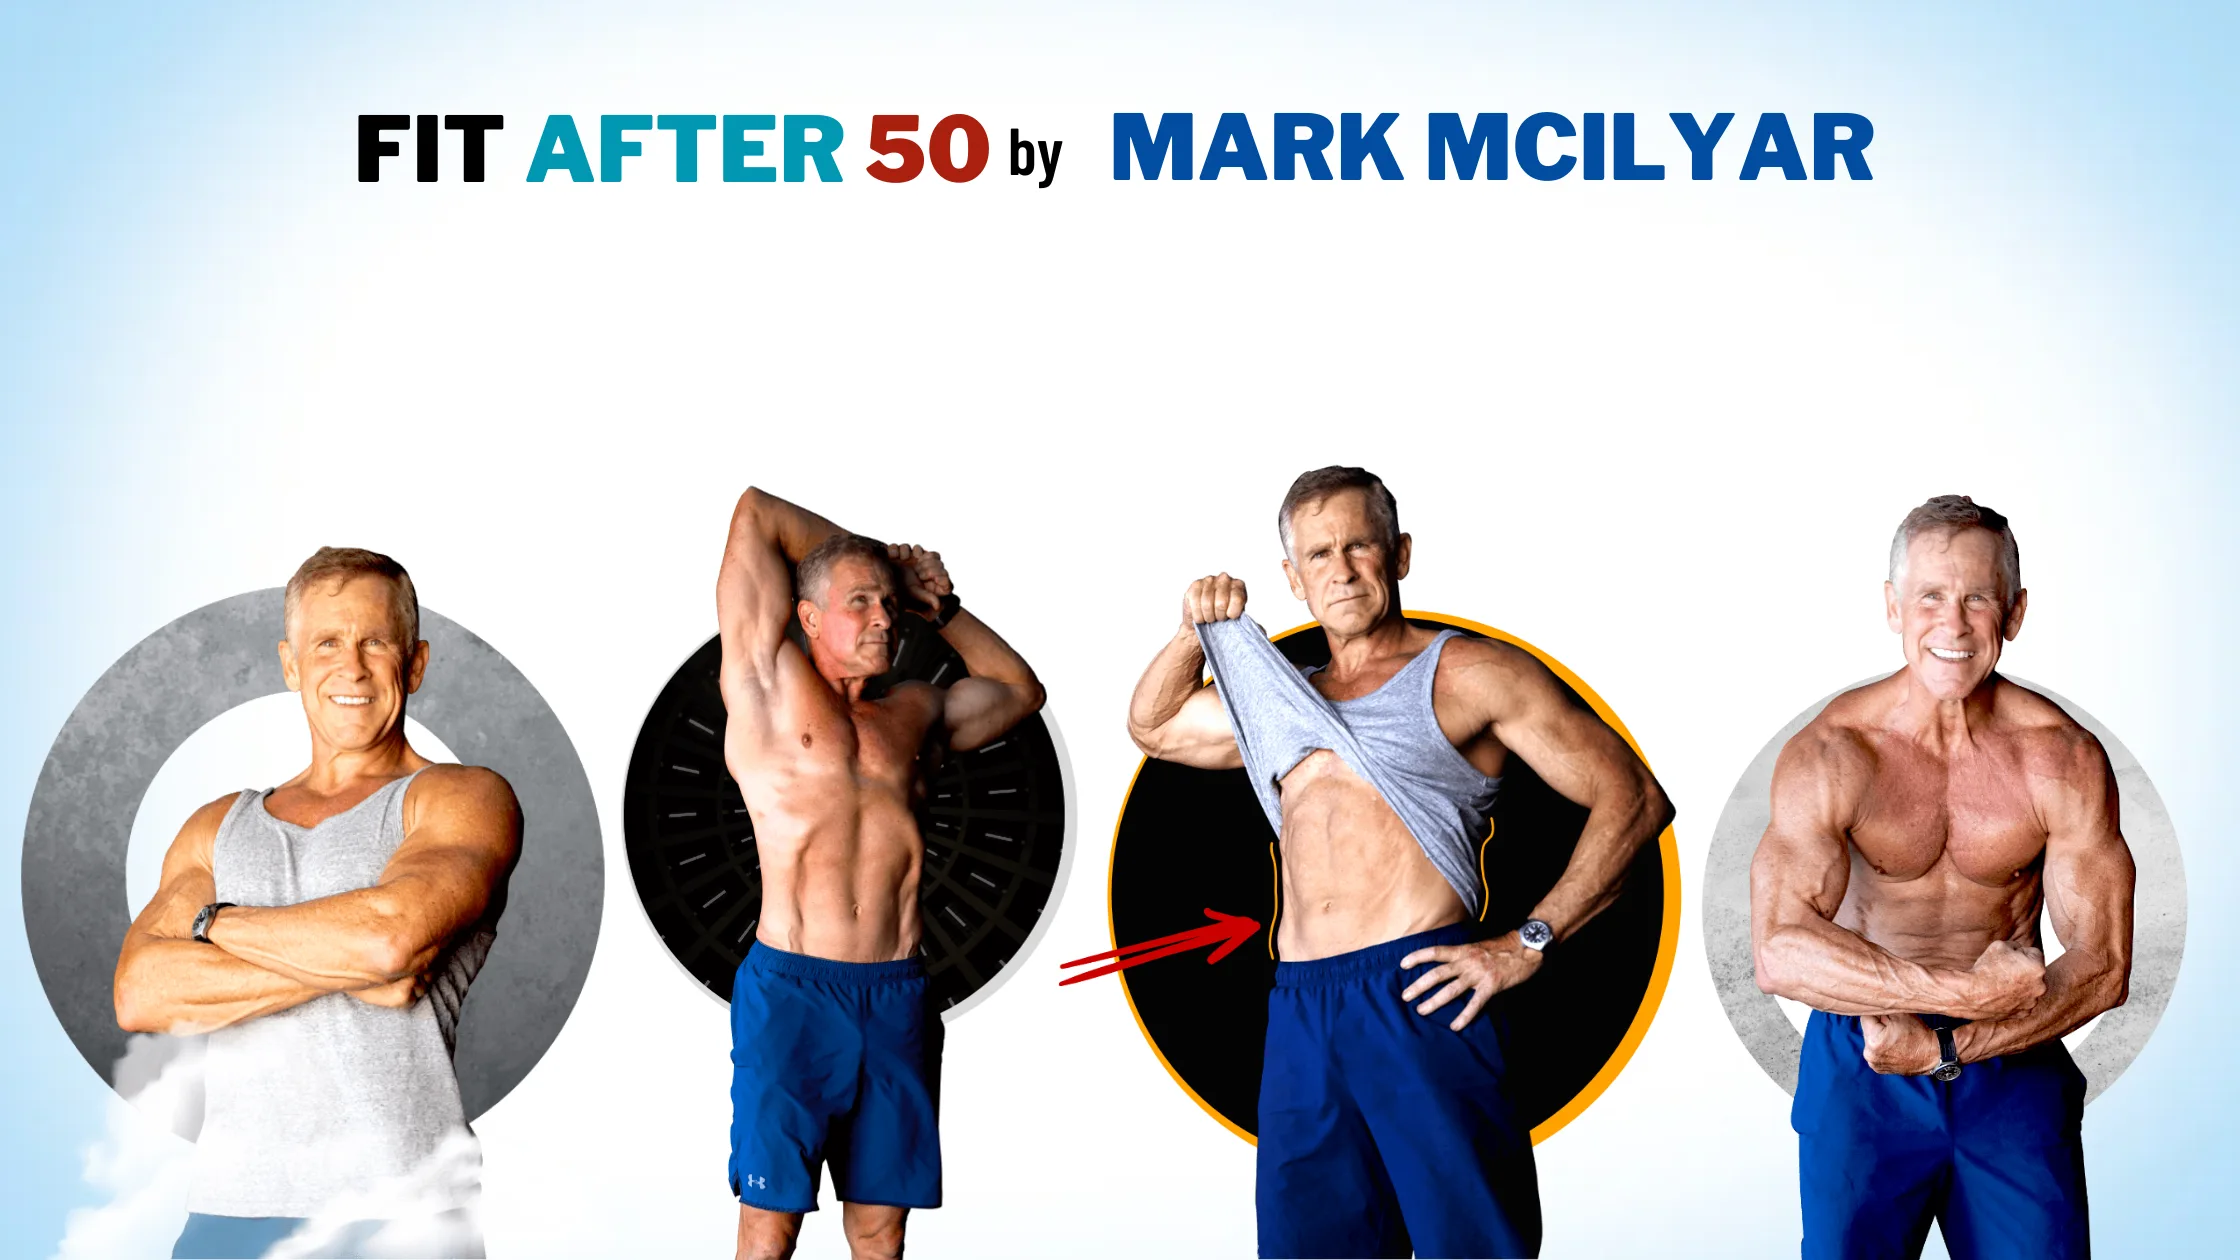 Creator of Fit After 50 Program